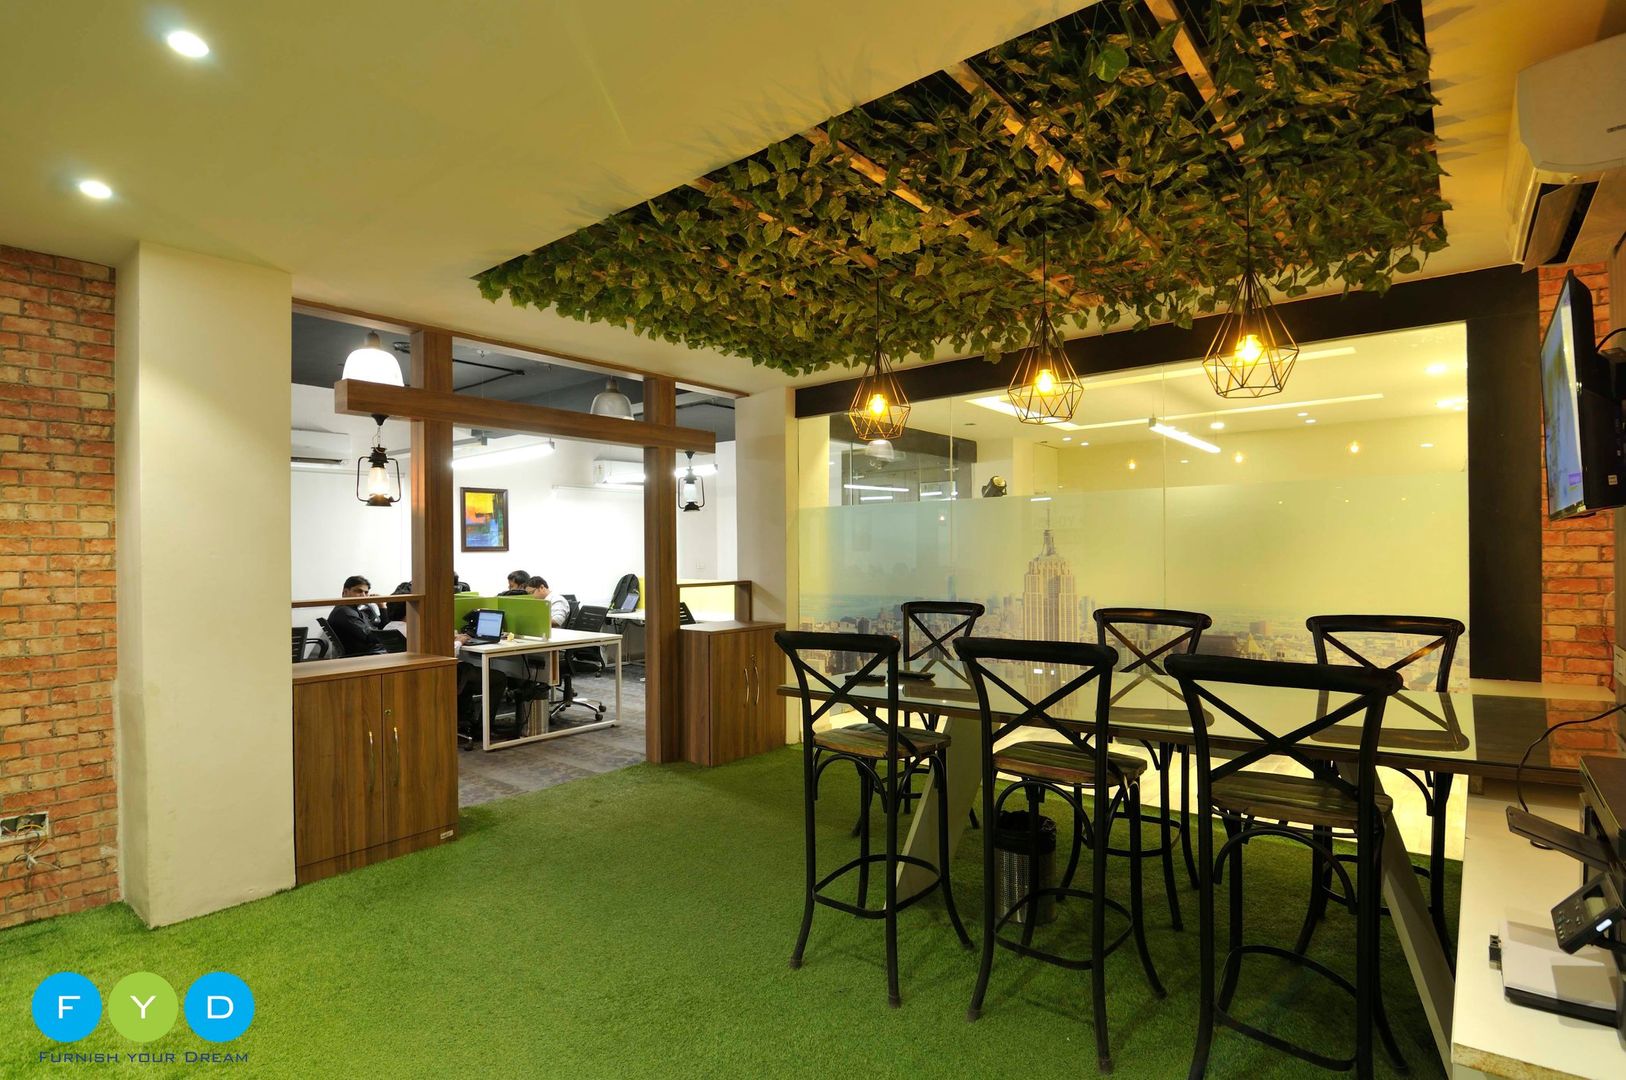 Let's Work - Coworking Space in Noida FYD Interiors Pvt. Ltd Commercial spaces Offices & stores